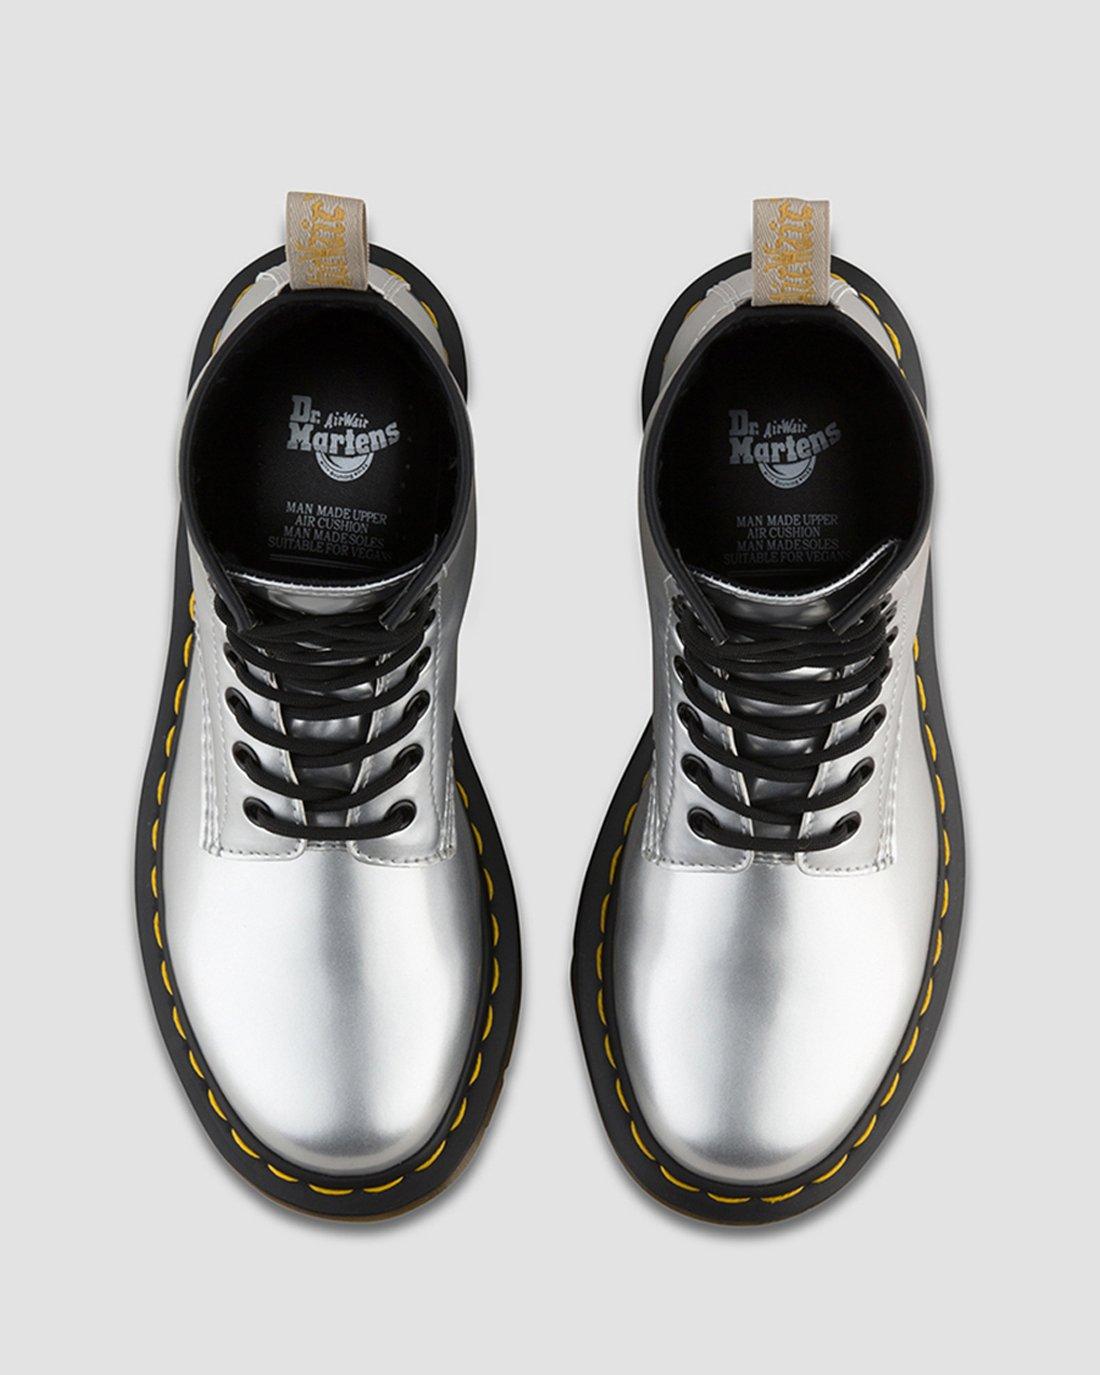 dr martens vegan 1460 red chrome flat ankle boots